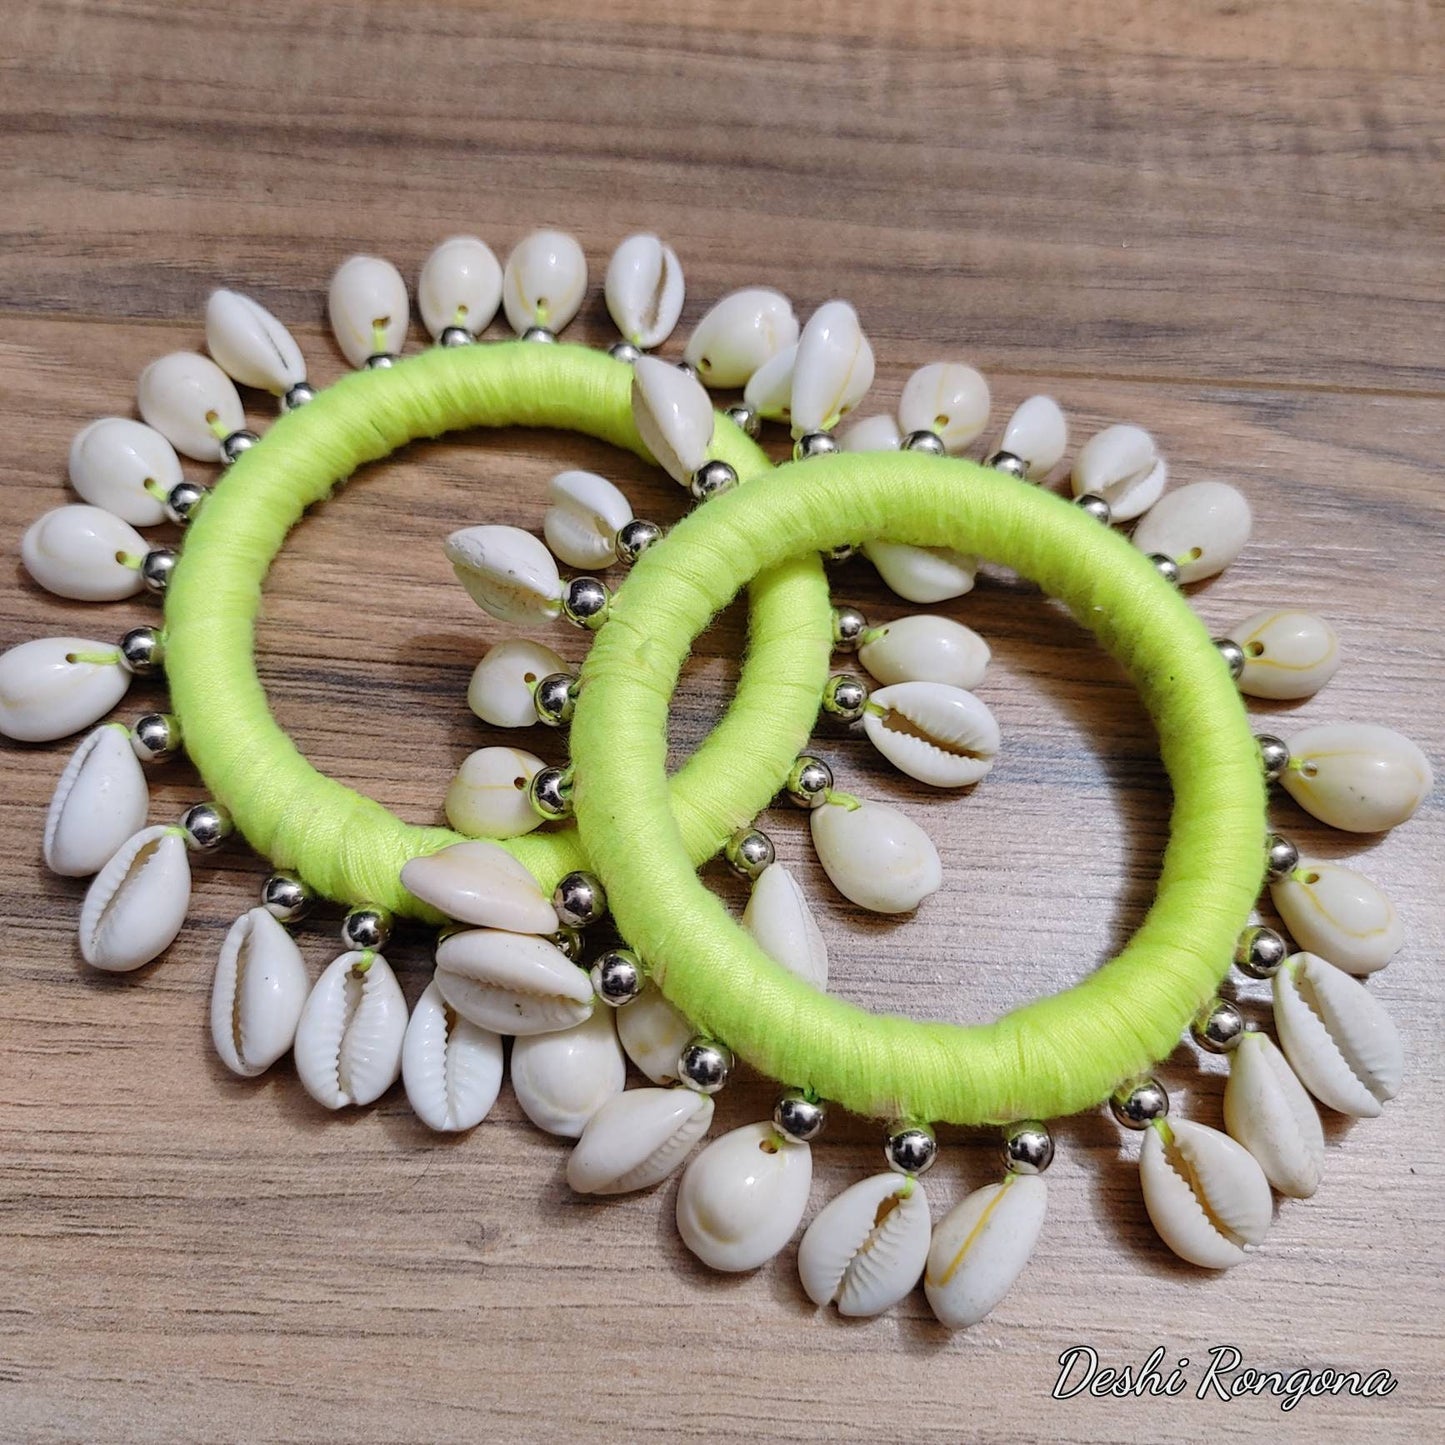 Cowrie Bangles, Red white Jewelry, 1 pair Bangles, Immaculate 100% Natural Snail Shell Vintage Style Handmade Bangles